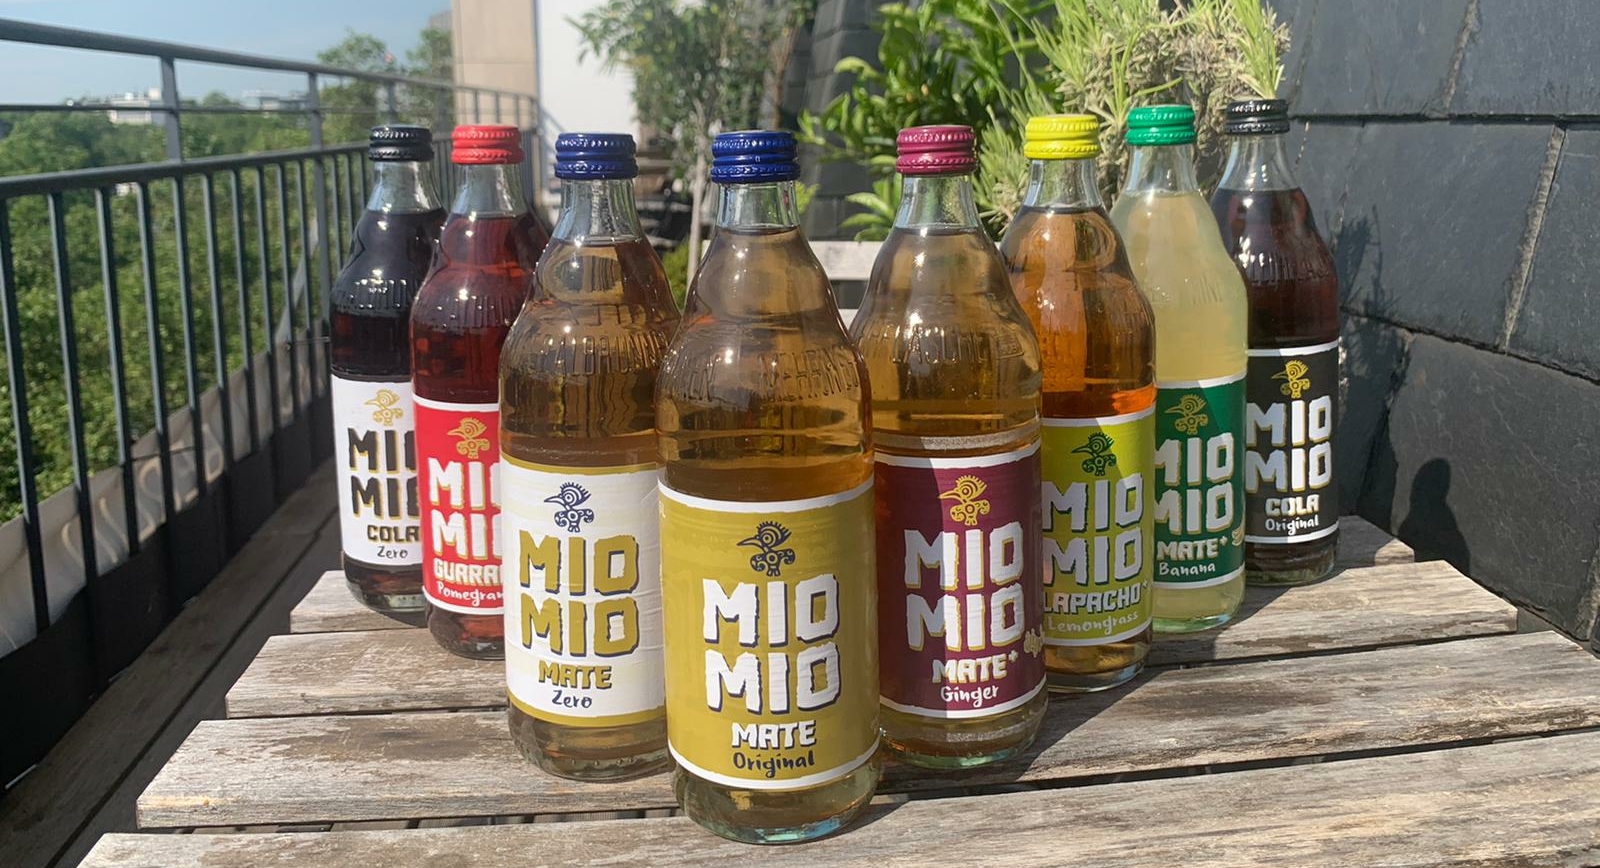 Mio Mio Mate: 8 drinks for the summer - Our test winner! - FIV